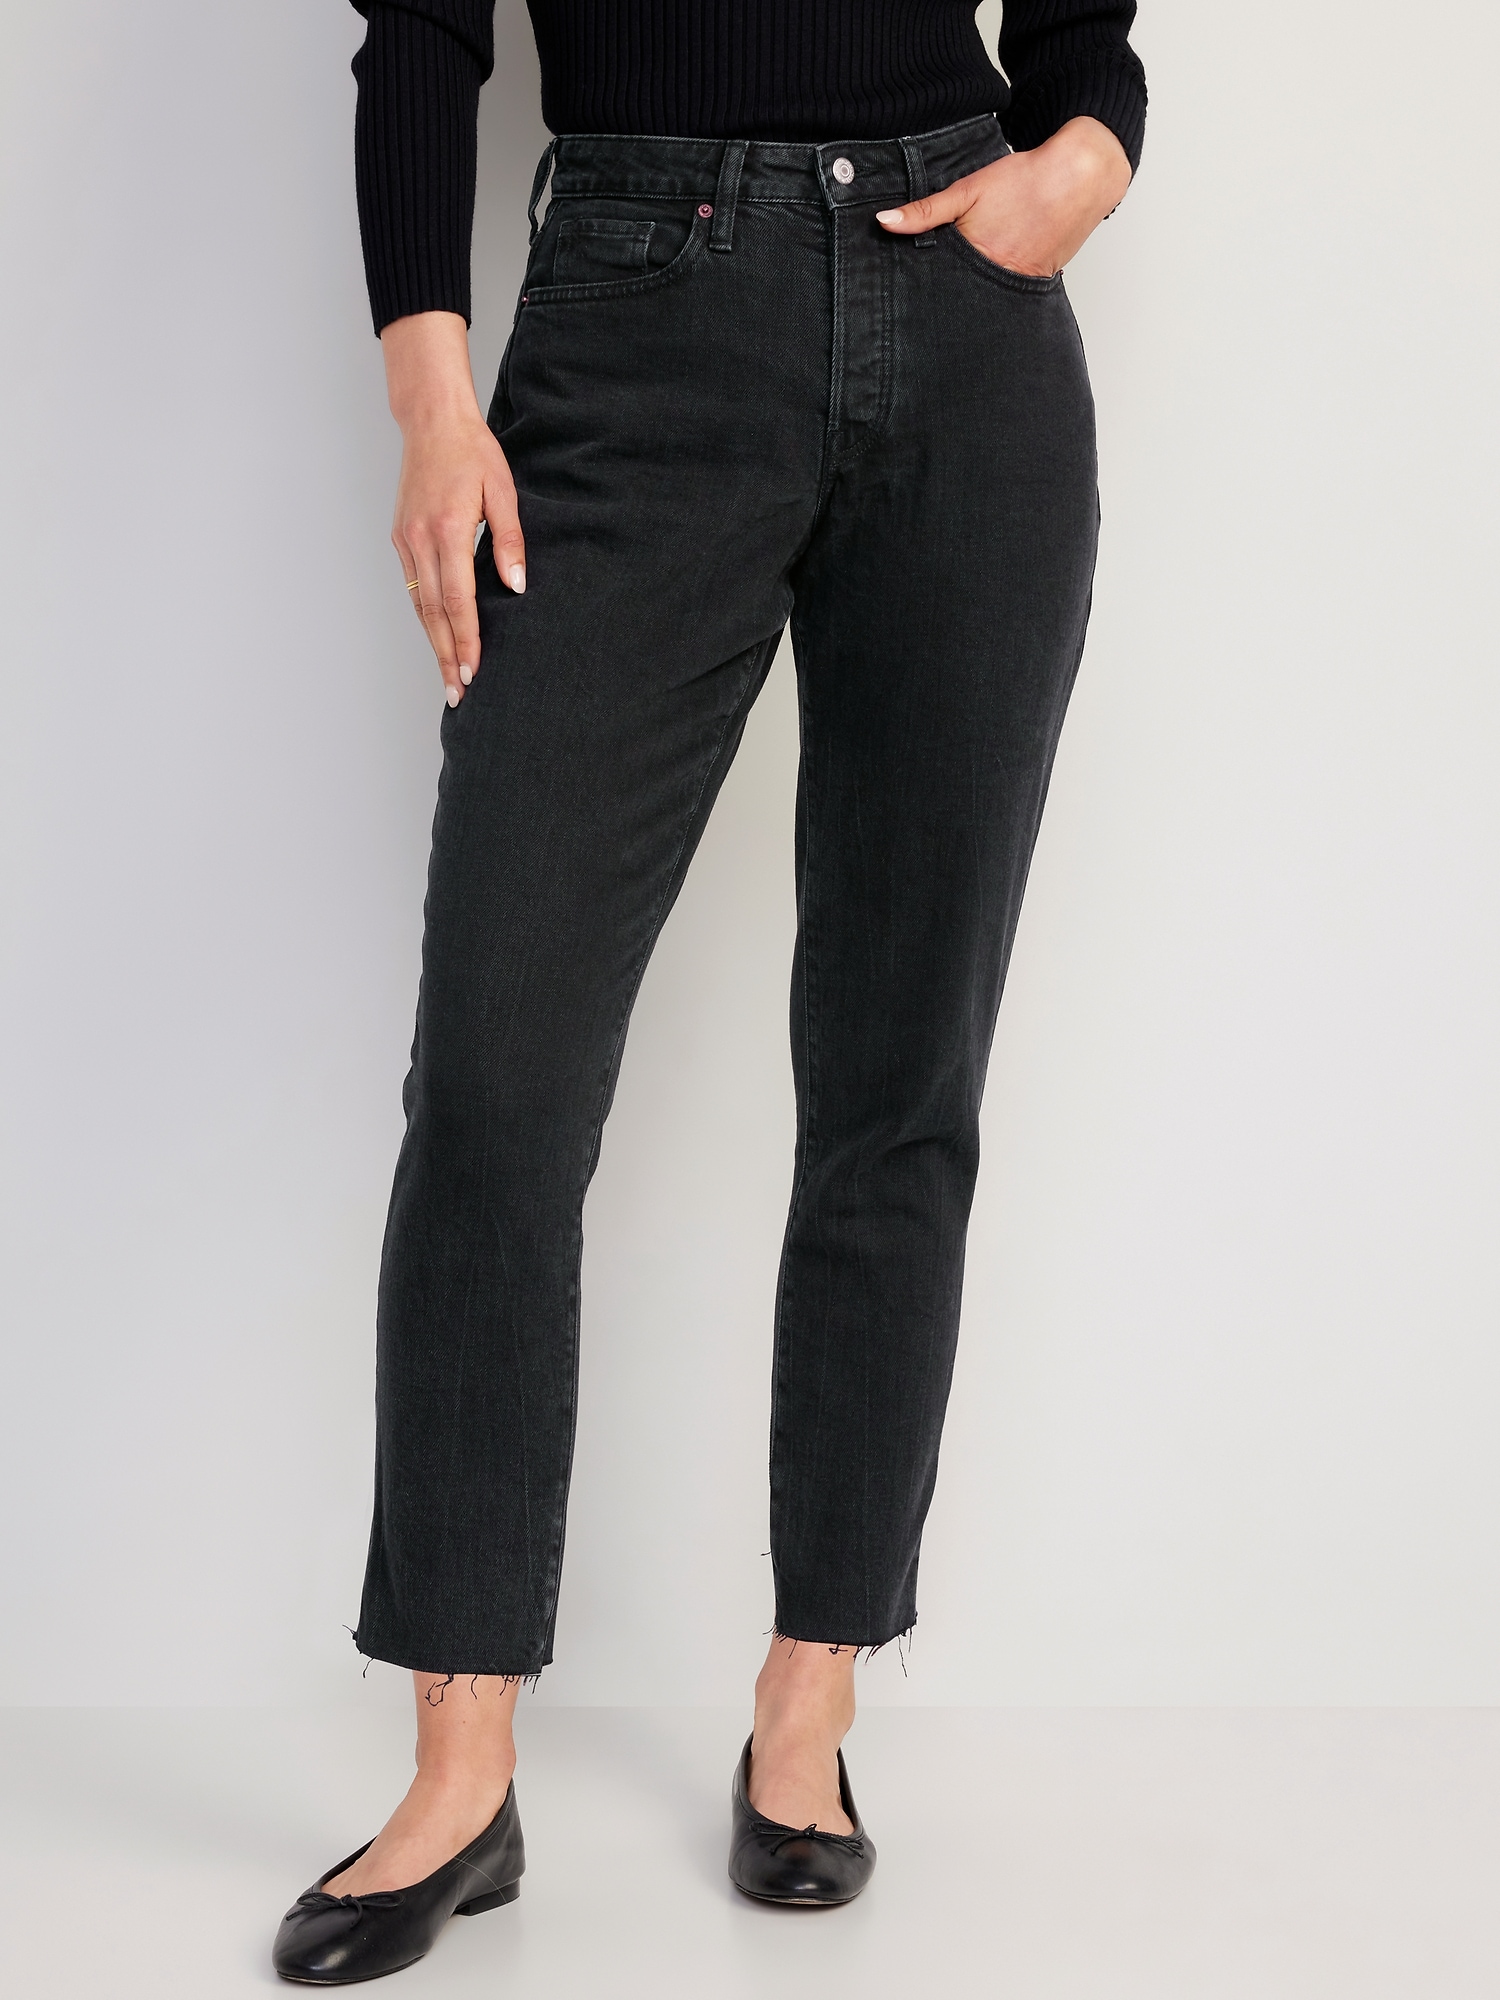 Gap Solid Black Jeans Size 16 (Tall) - 68% off